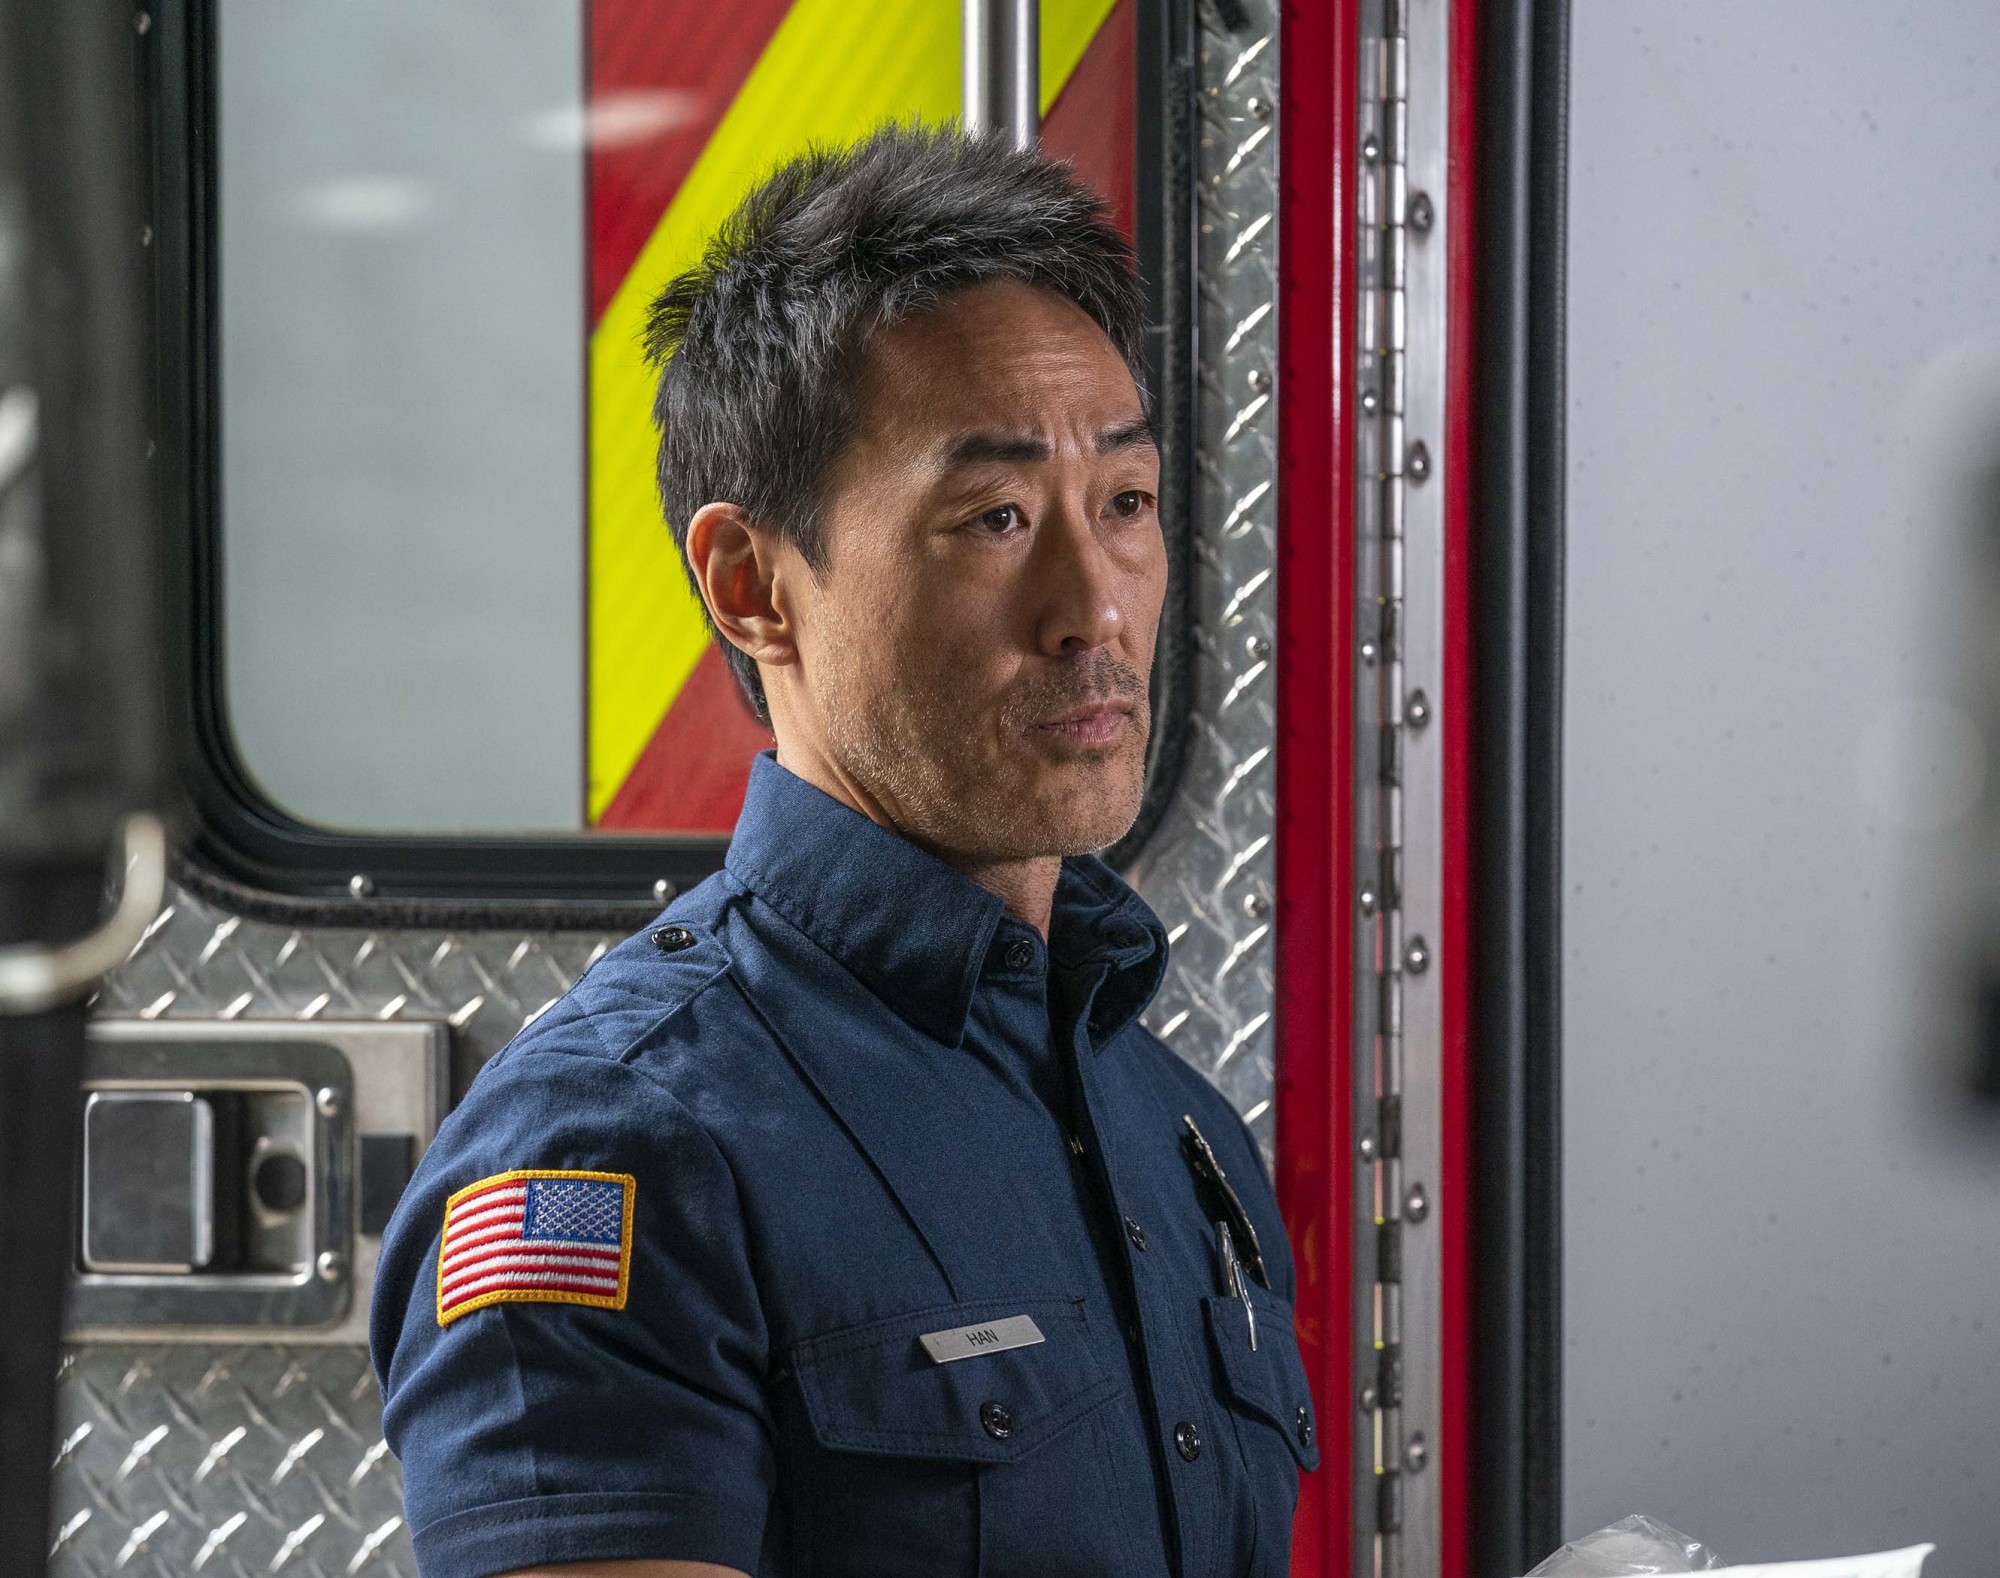 9-1-1: Kenneth Choi in the “9-1-1, What's Your Grievance” episode of 9-1-1 airing Monday, Feb. 8 (8:00-9:00 PM ET/PT) on FOX. CR: Jack Zeman / FOX. © 2021 FOX Media LLC.